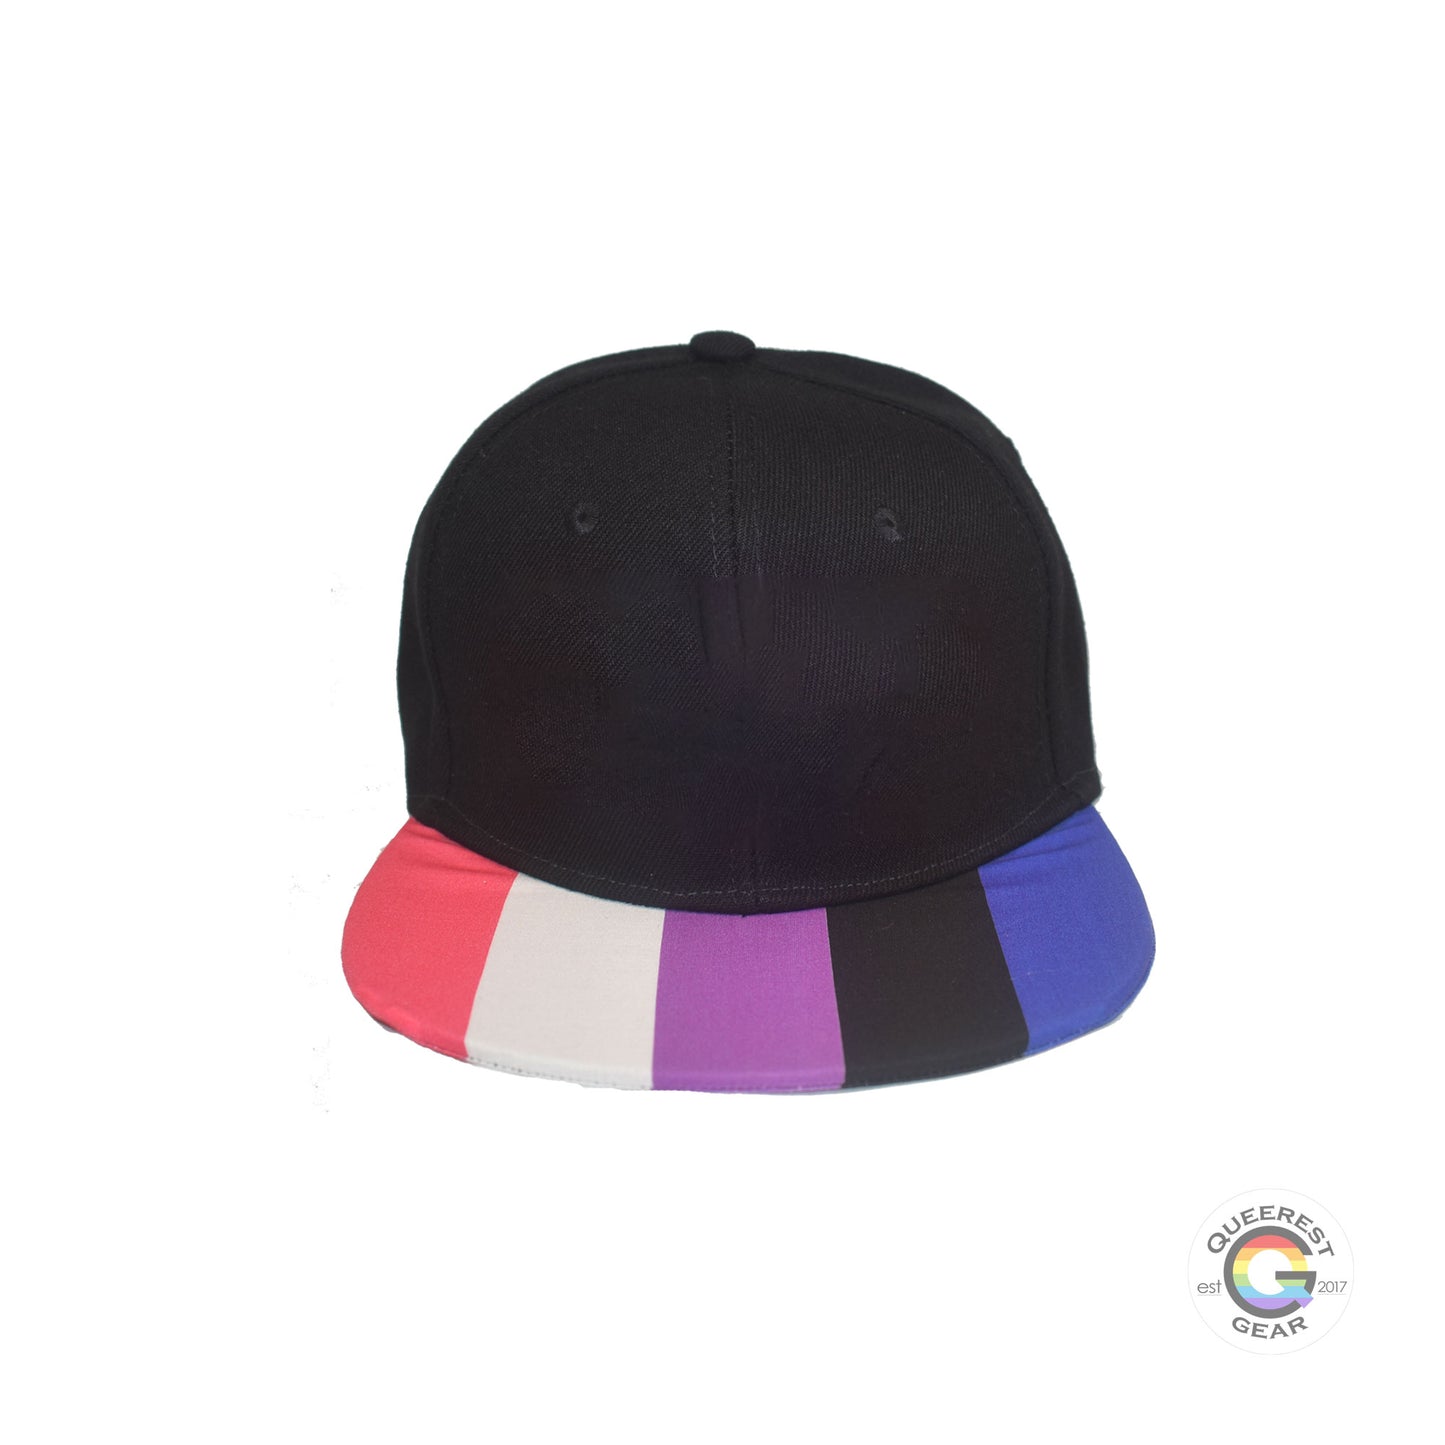 Black flat bill snapback hat. The brim has the genderfluid pride flag on both sides. Front view